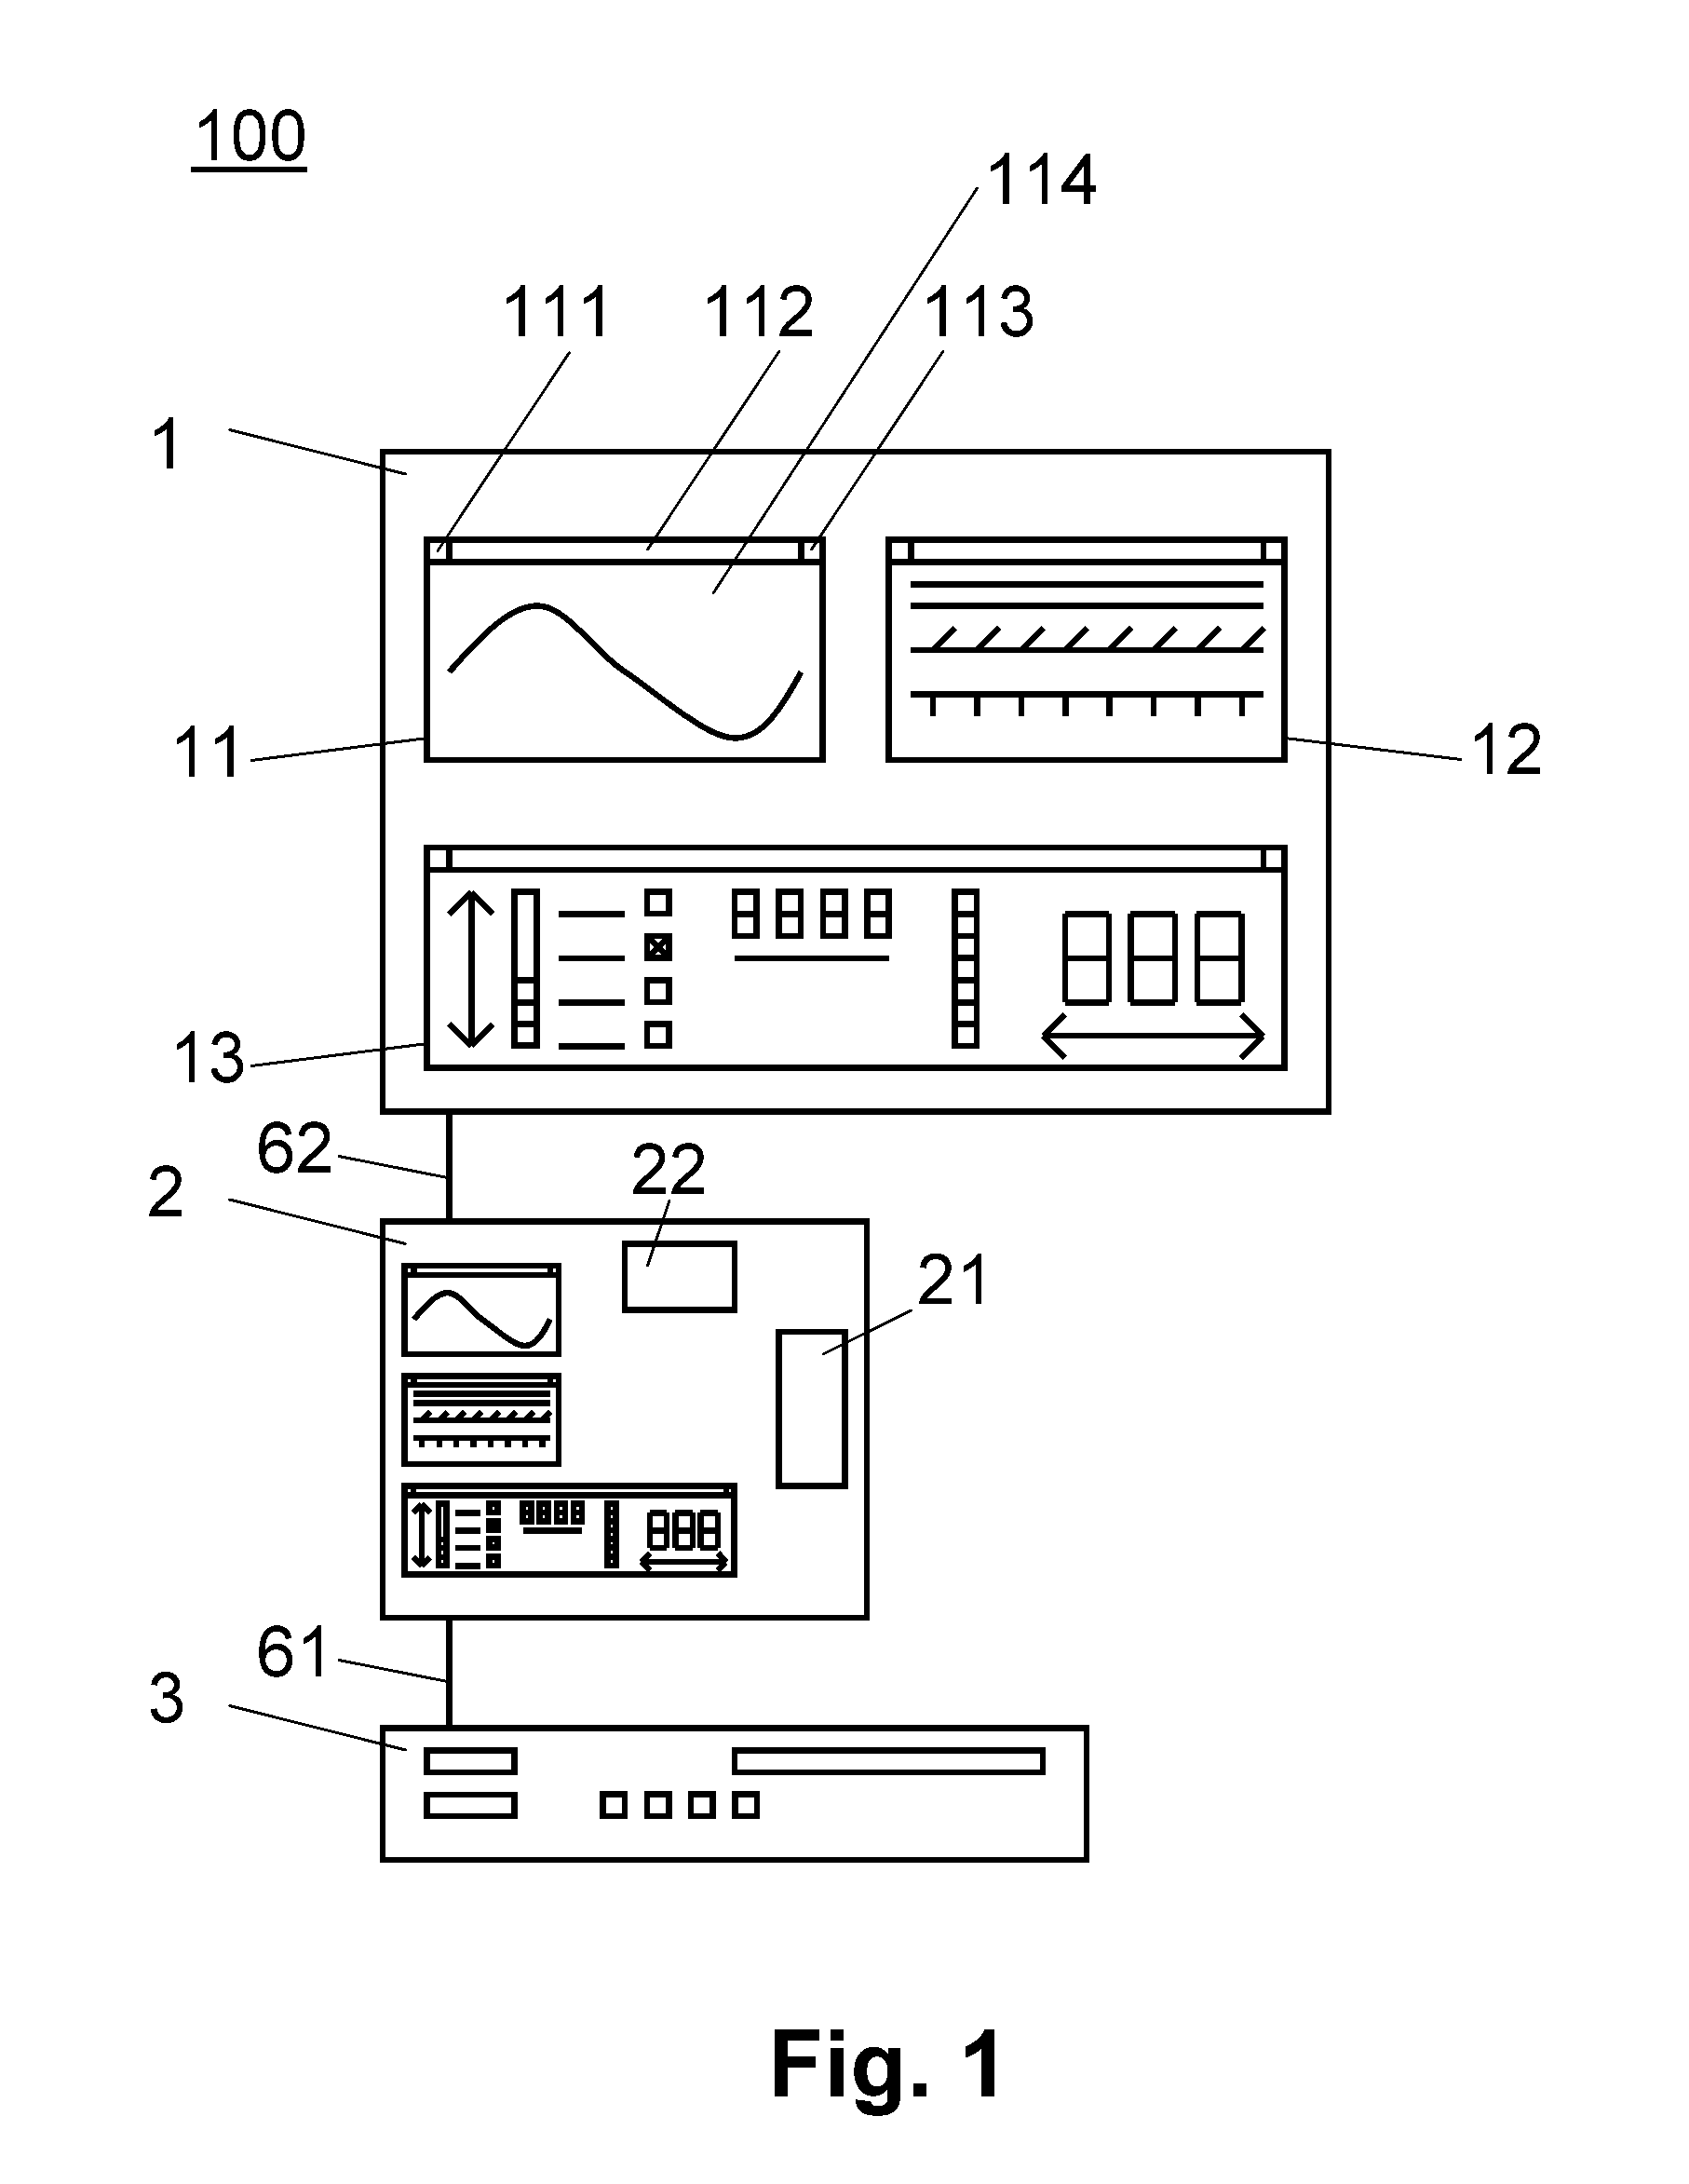 Computer-implemented system and method of enabling a user to interact with an electronic test equipment using a mobile device